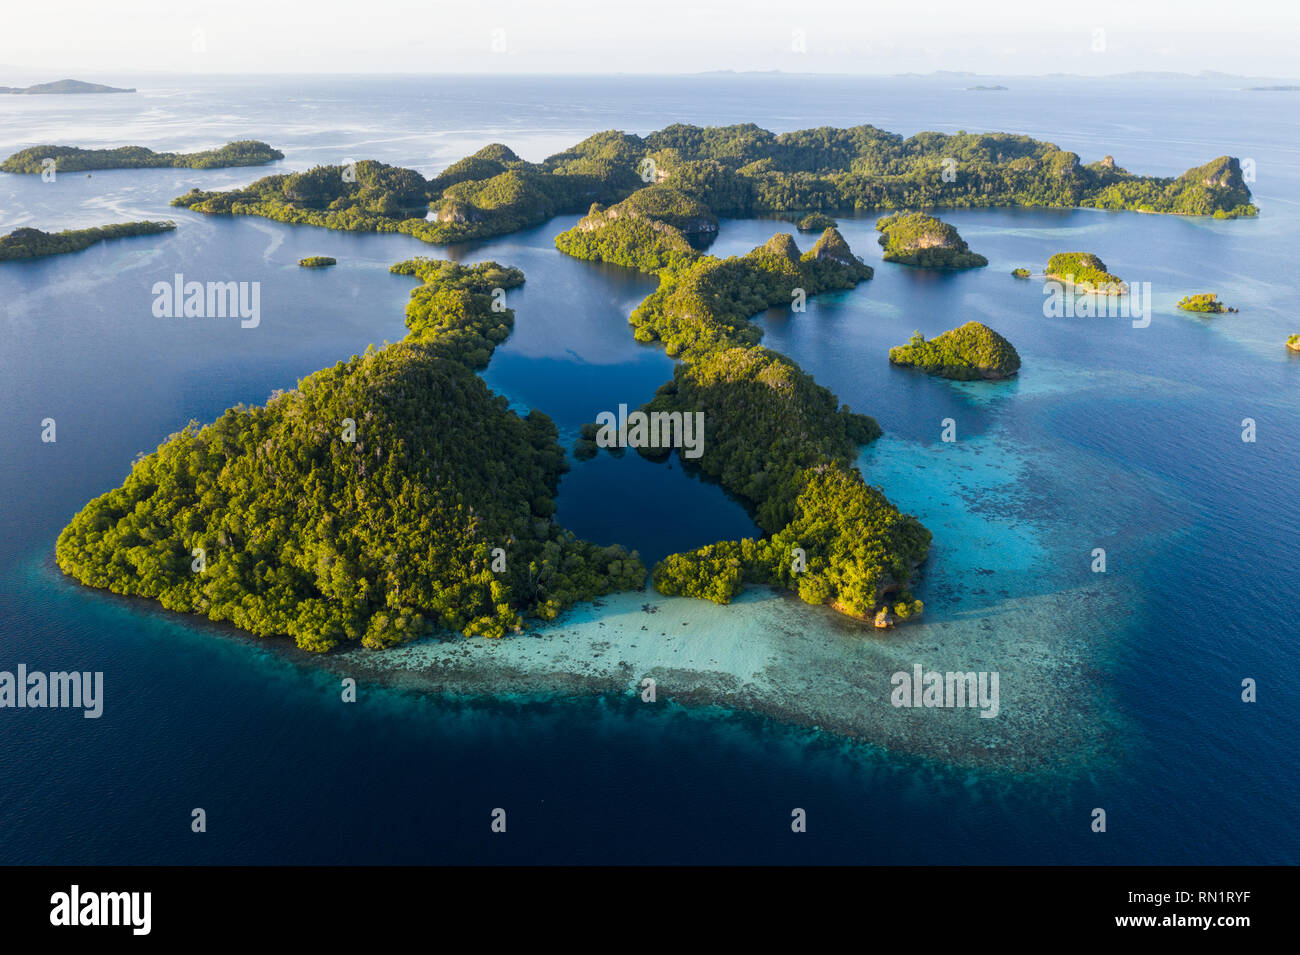 An aerial view of islands in Raja Ampat. This area is the heart of marine biodiversity and is a popular destination for scuba divers and snorkelers. Stock Photo